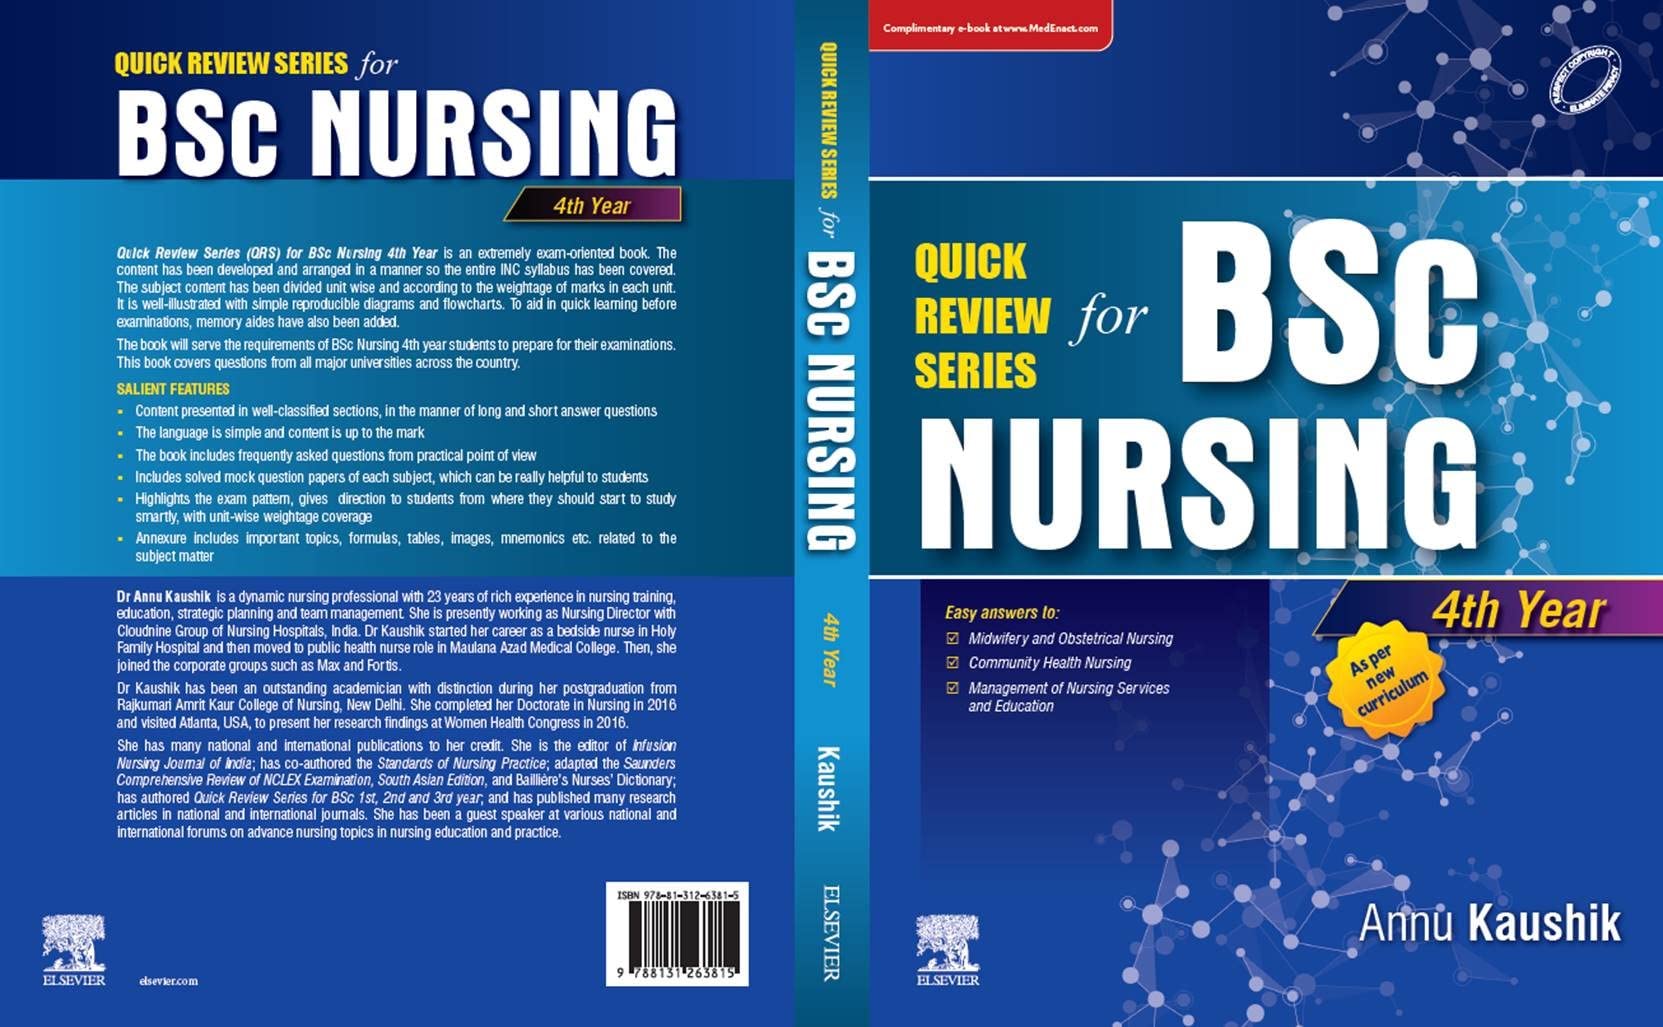 Quick Review Series for B.Sc. Nursing: 4th Year